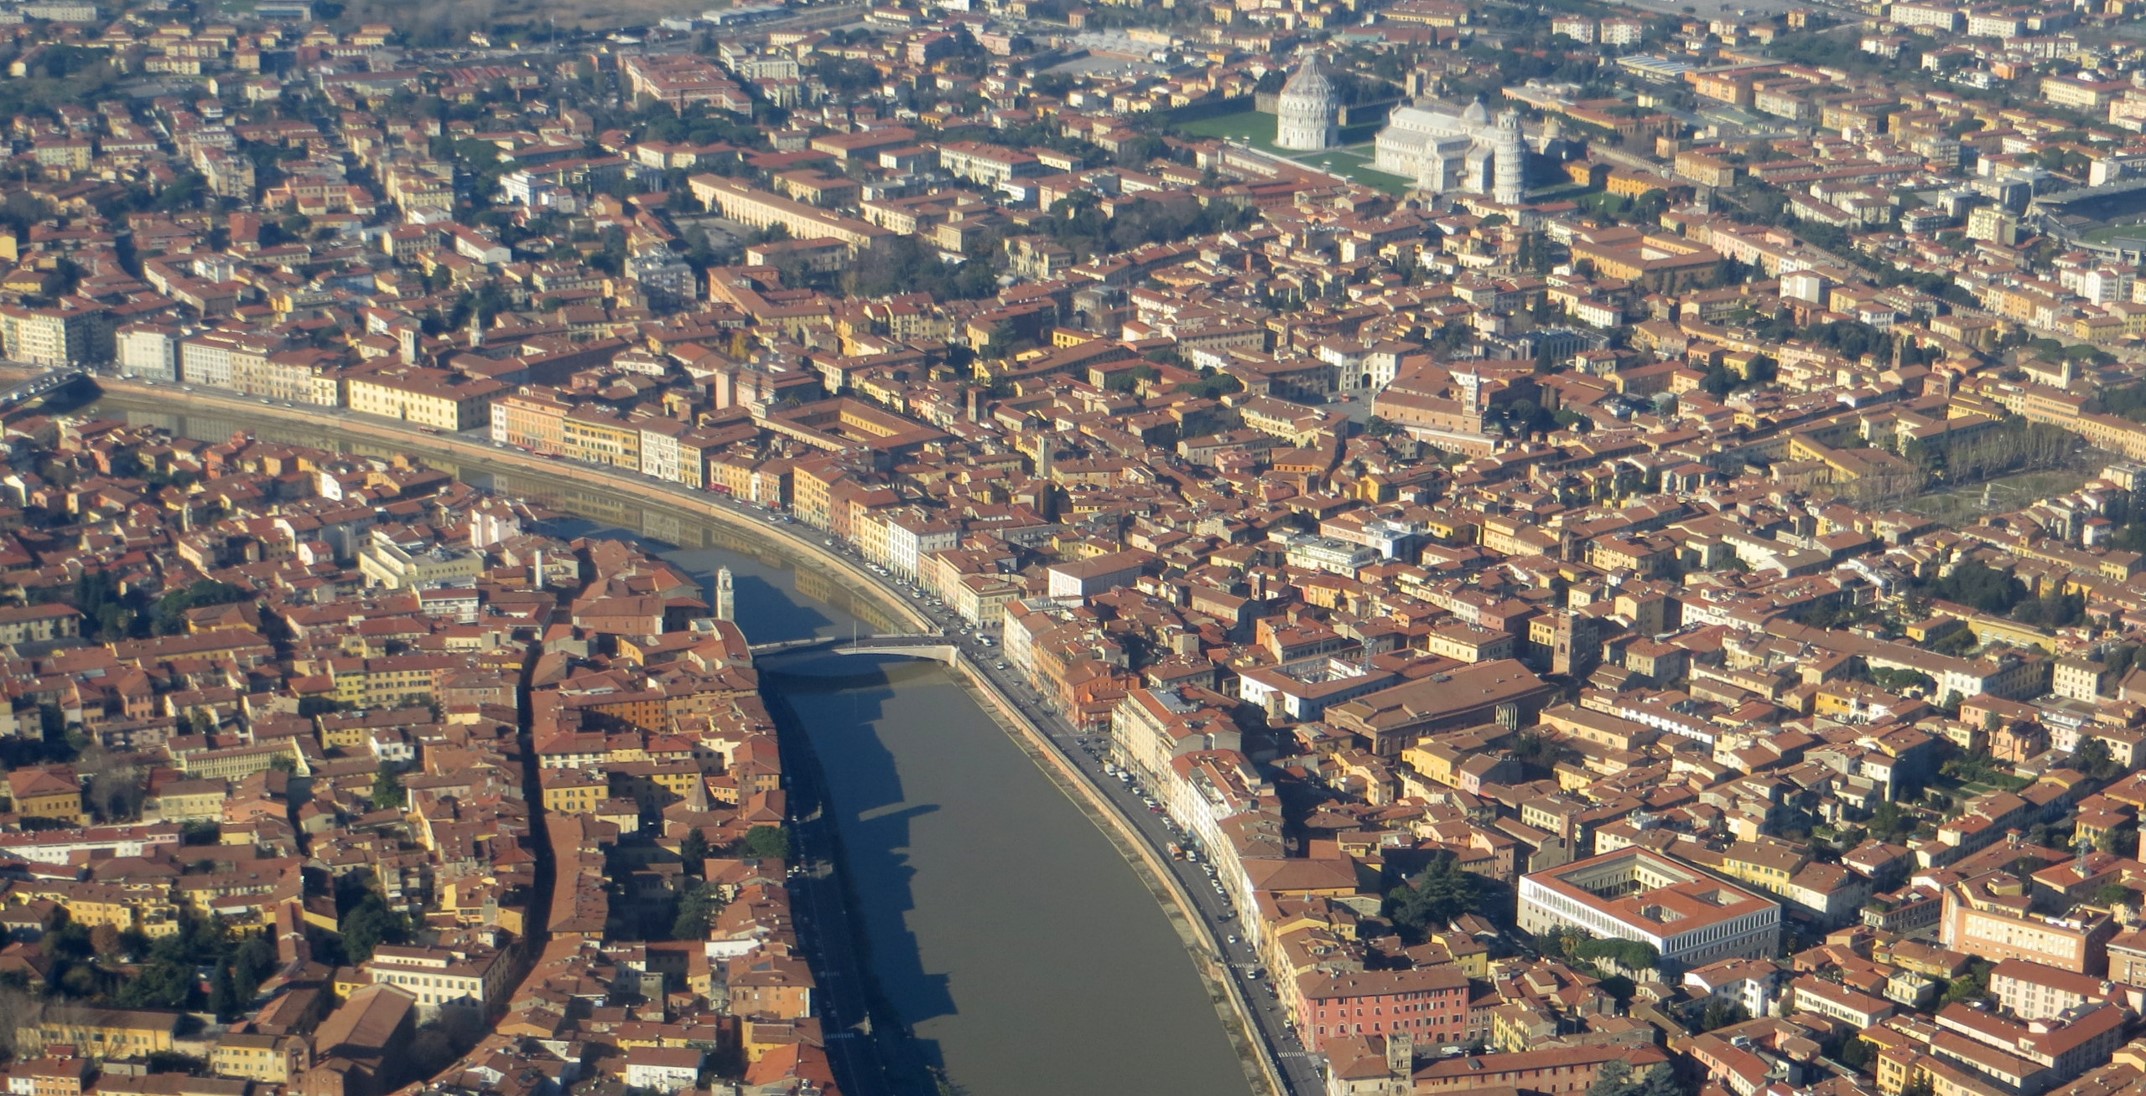 Aerial view of Pisa, Italy